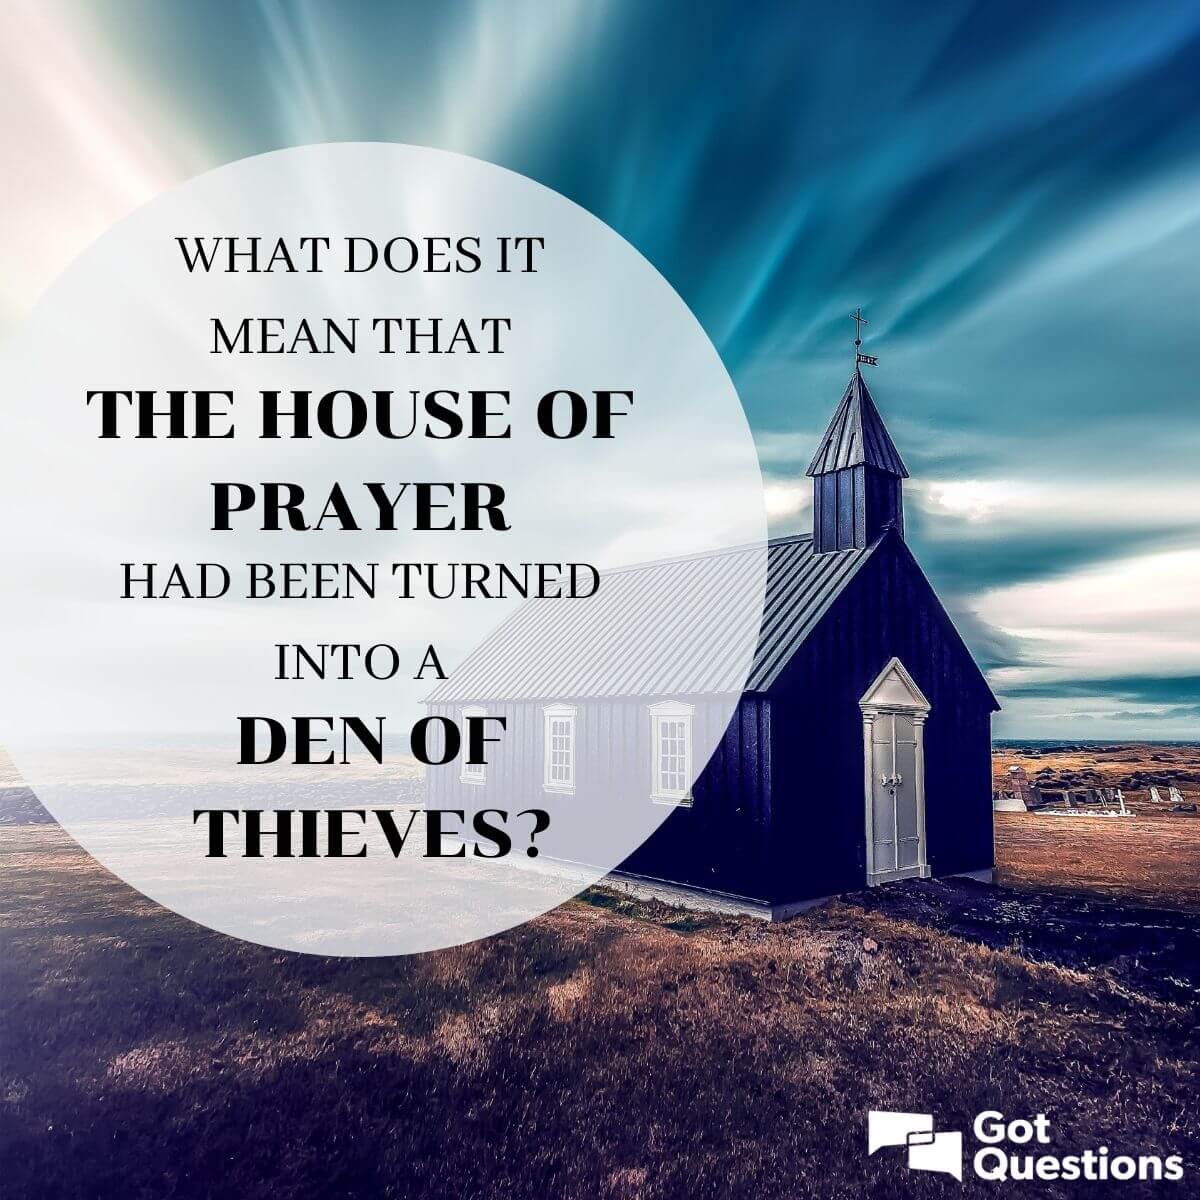 What does it mean that the house of prayer had been turned